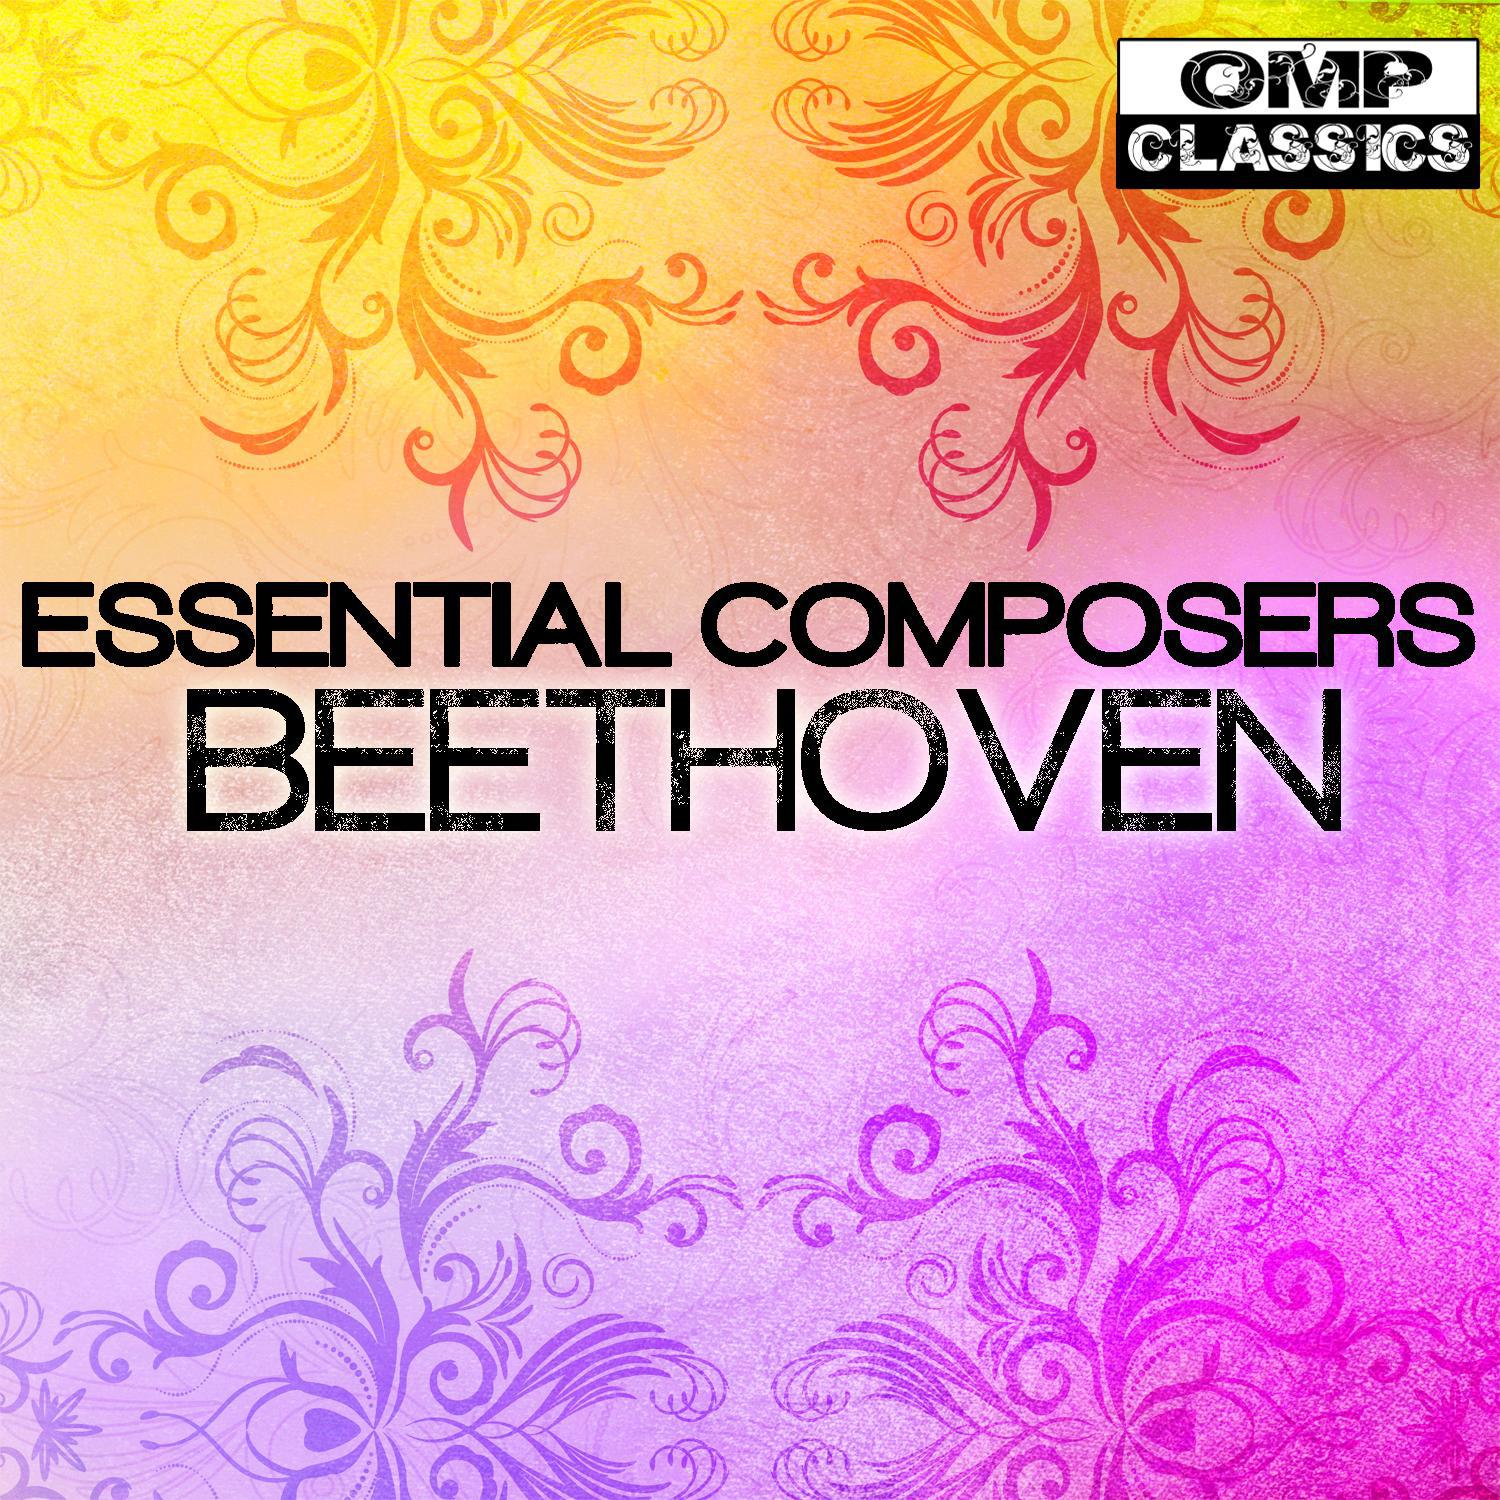 Essential Composers: Beethoven